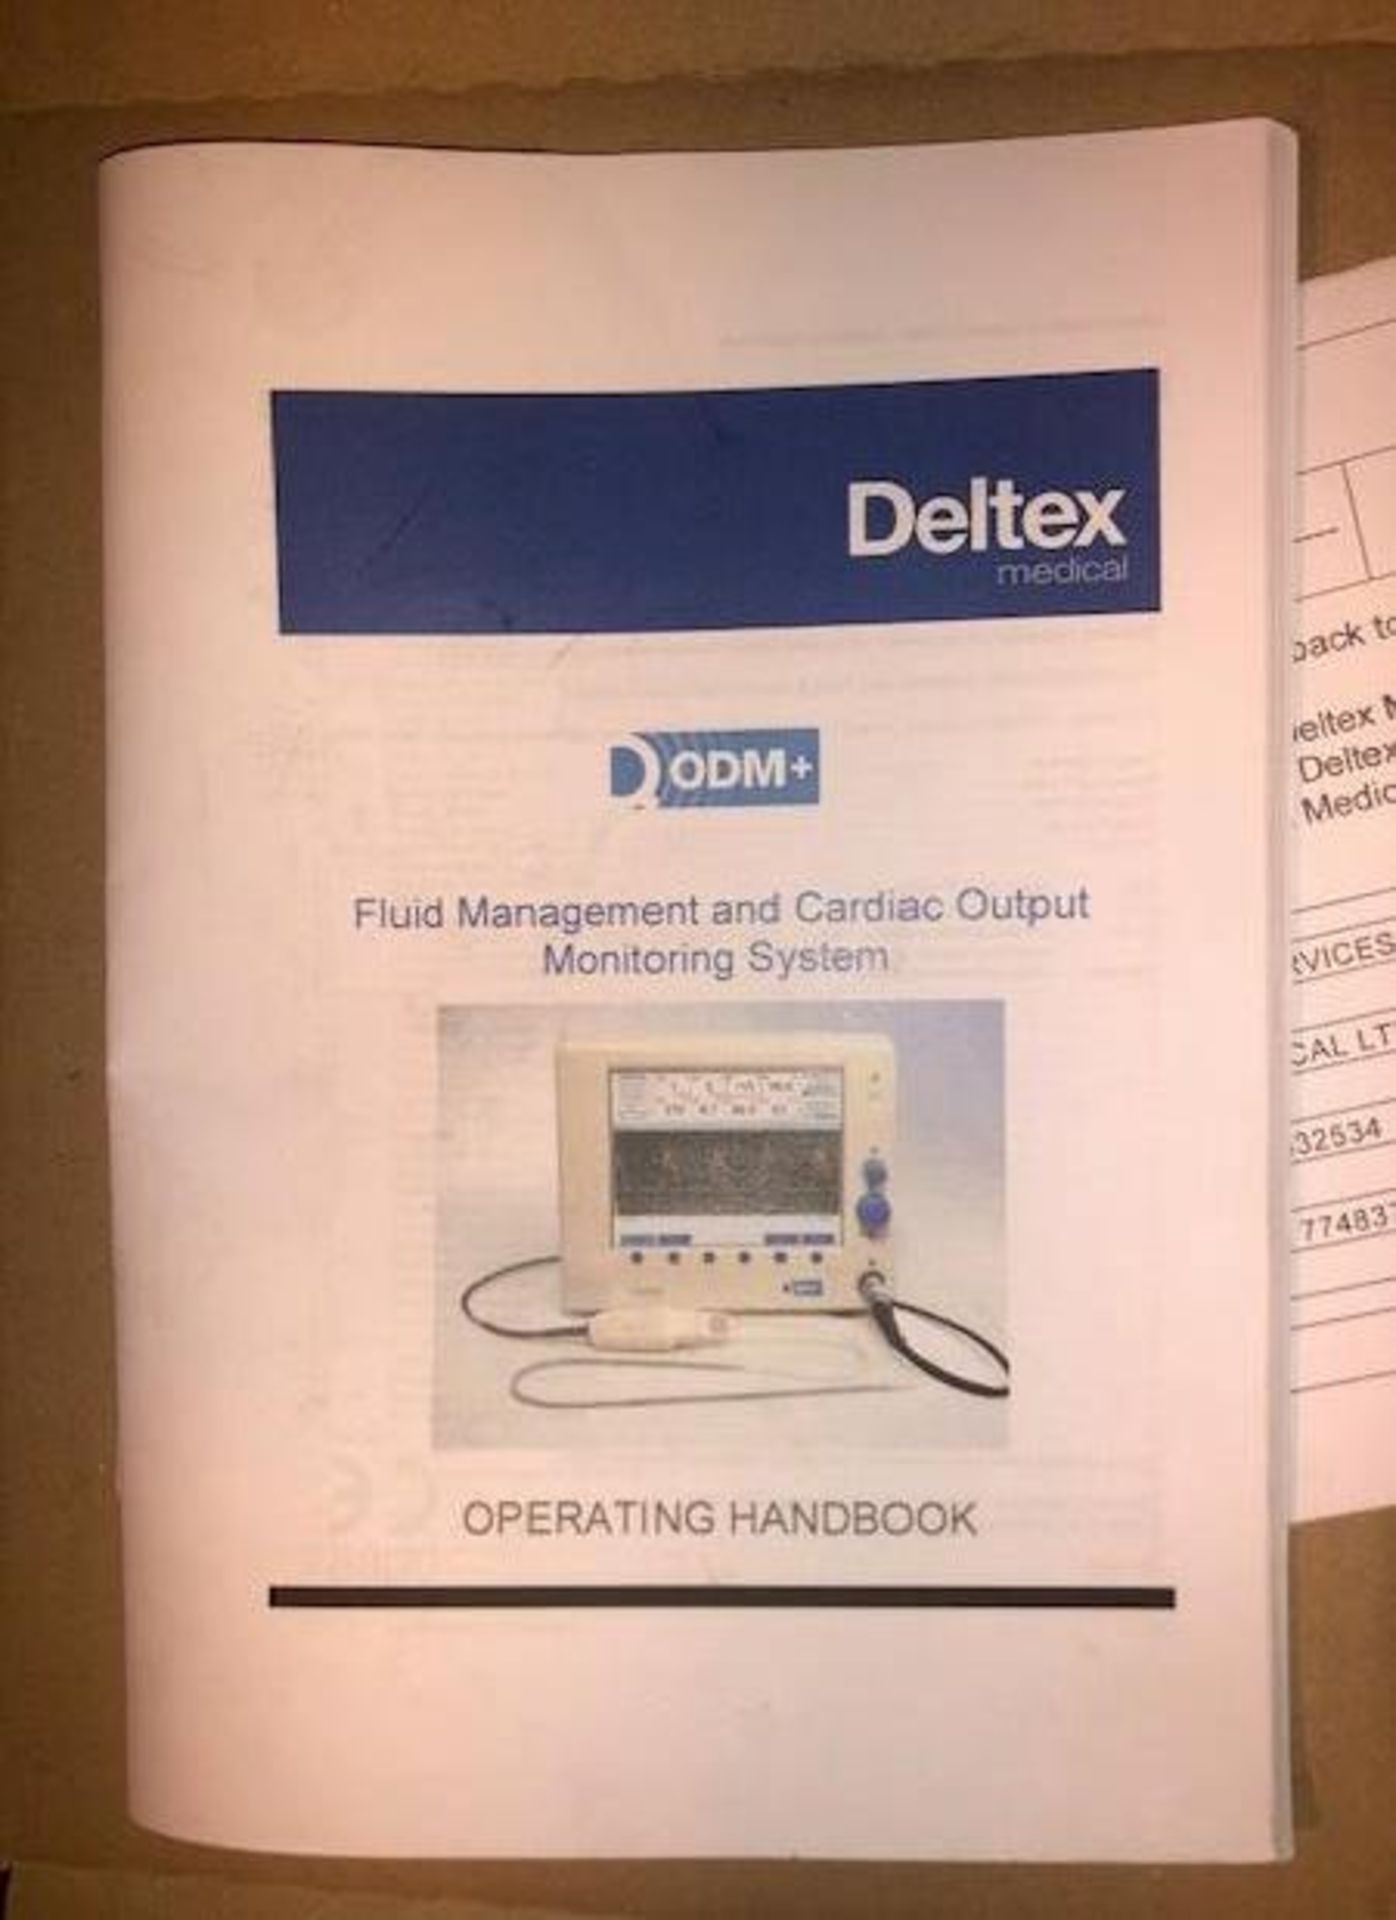 LOCATED OFF SITE - 10x Deltex CardioQ-ODM+ patient monitors - The world’s first fluid mana - Image 8 of 10